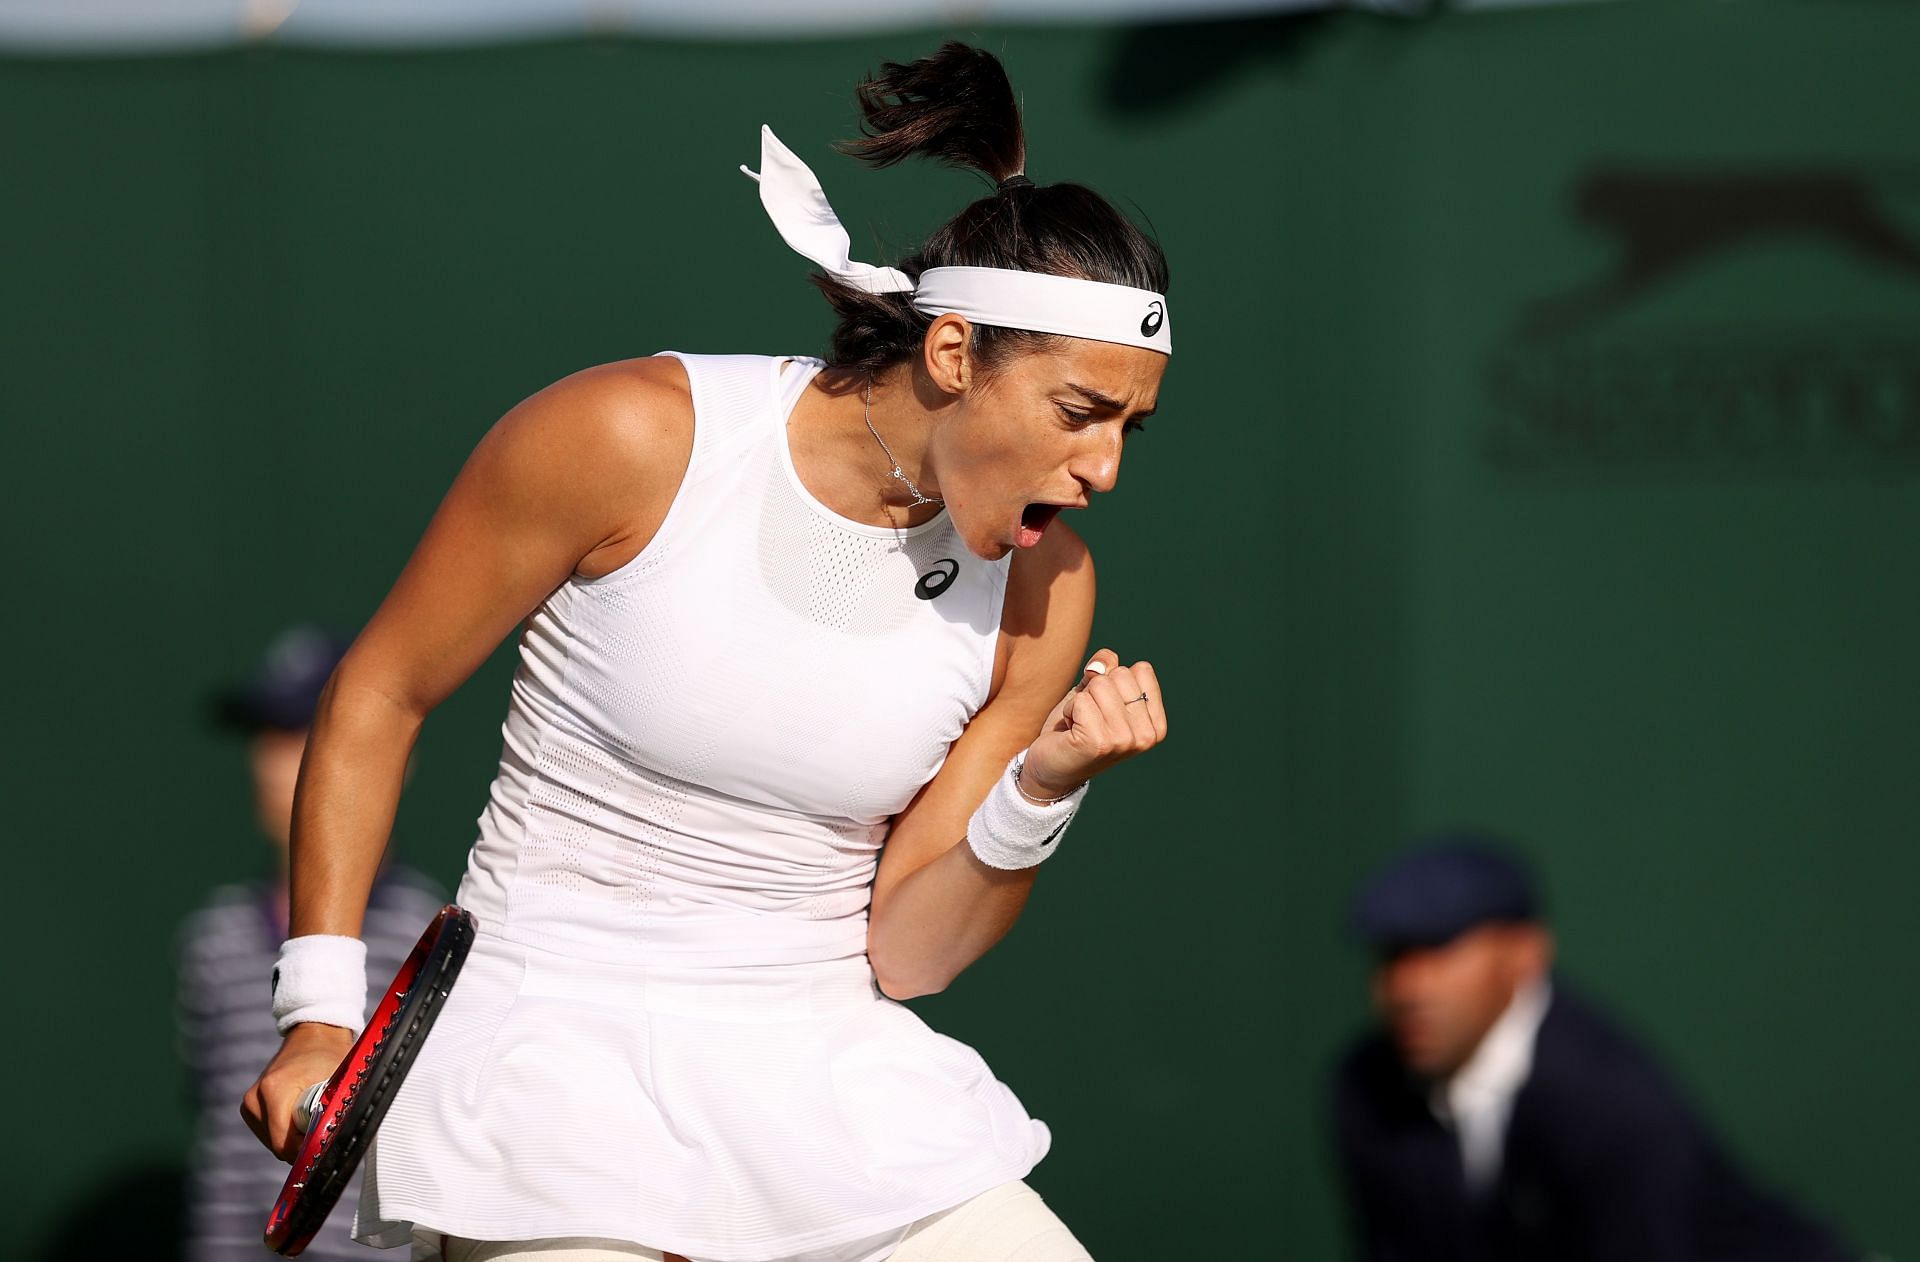 Caroline Garcia celebrates a point during her first-round match at the 2022 Championships